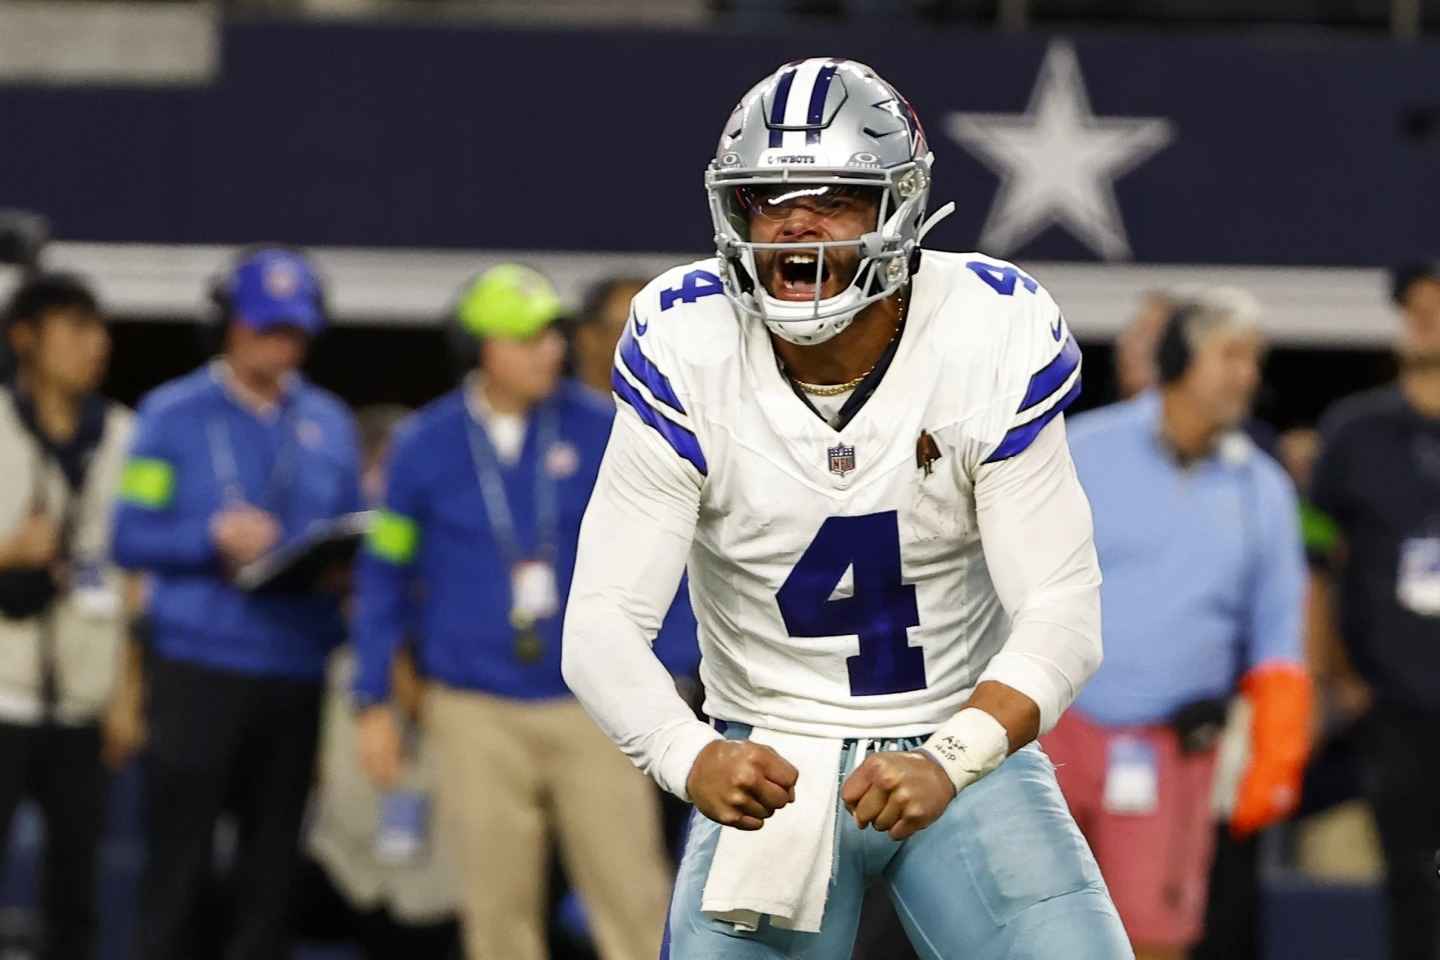 During the second half of an NFL football game against the Seattle Seahawks in Arlington, Texas, on Thursday, November 30, 2023, quarterback Dak Prescott of the Dallas Cowboys, who is four years old, celebrates after completing a touchdown pass to Jake Ferguson, who is not pictured. Photo Credit: Google (Image)